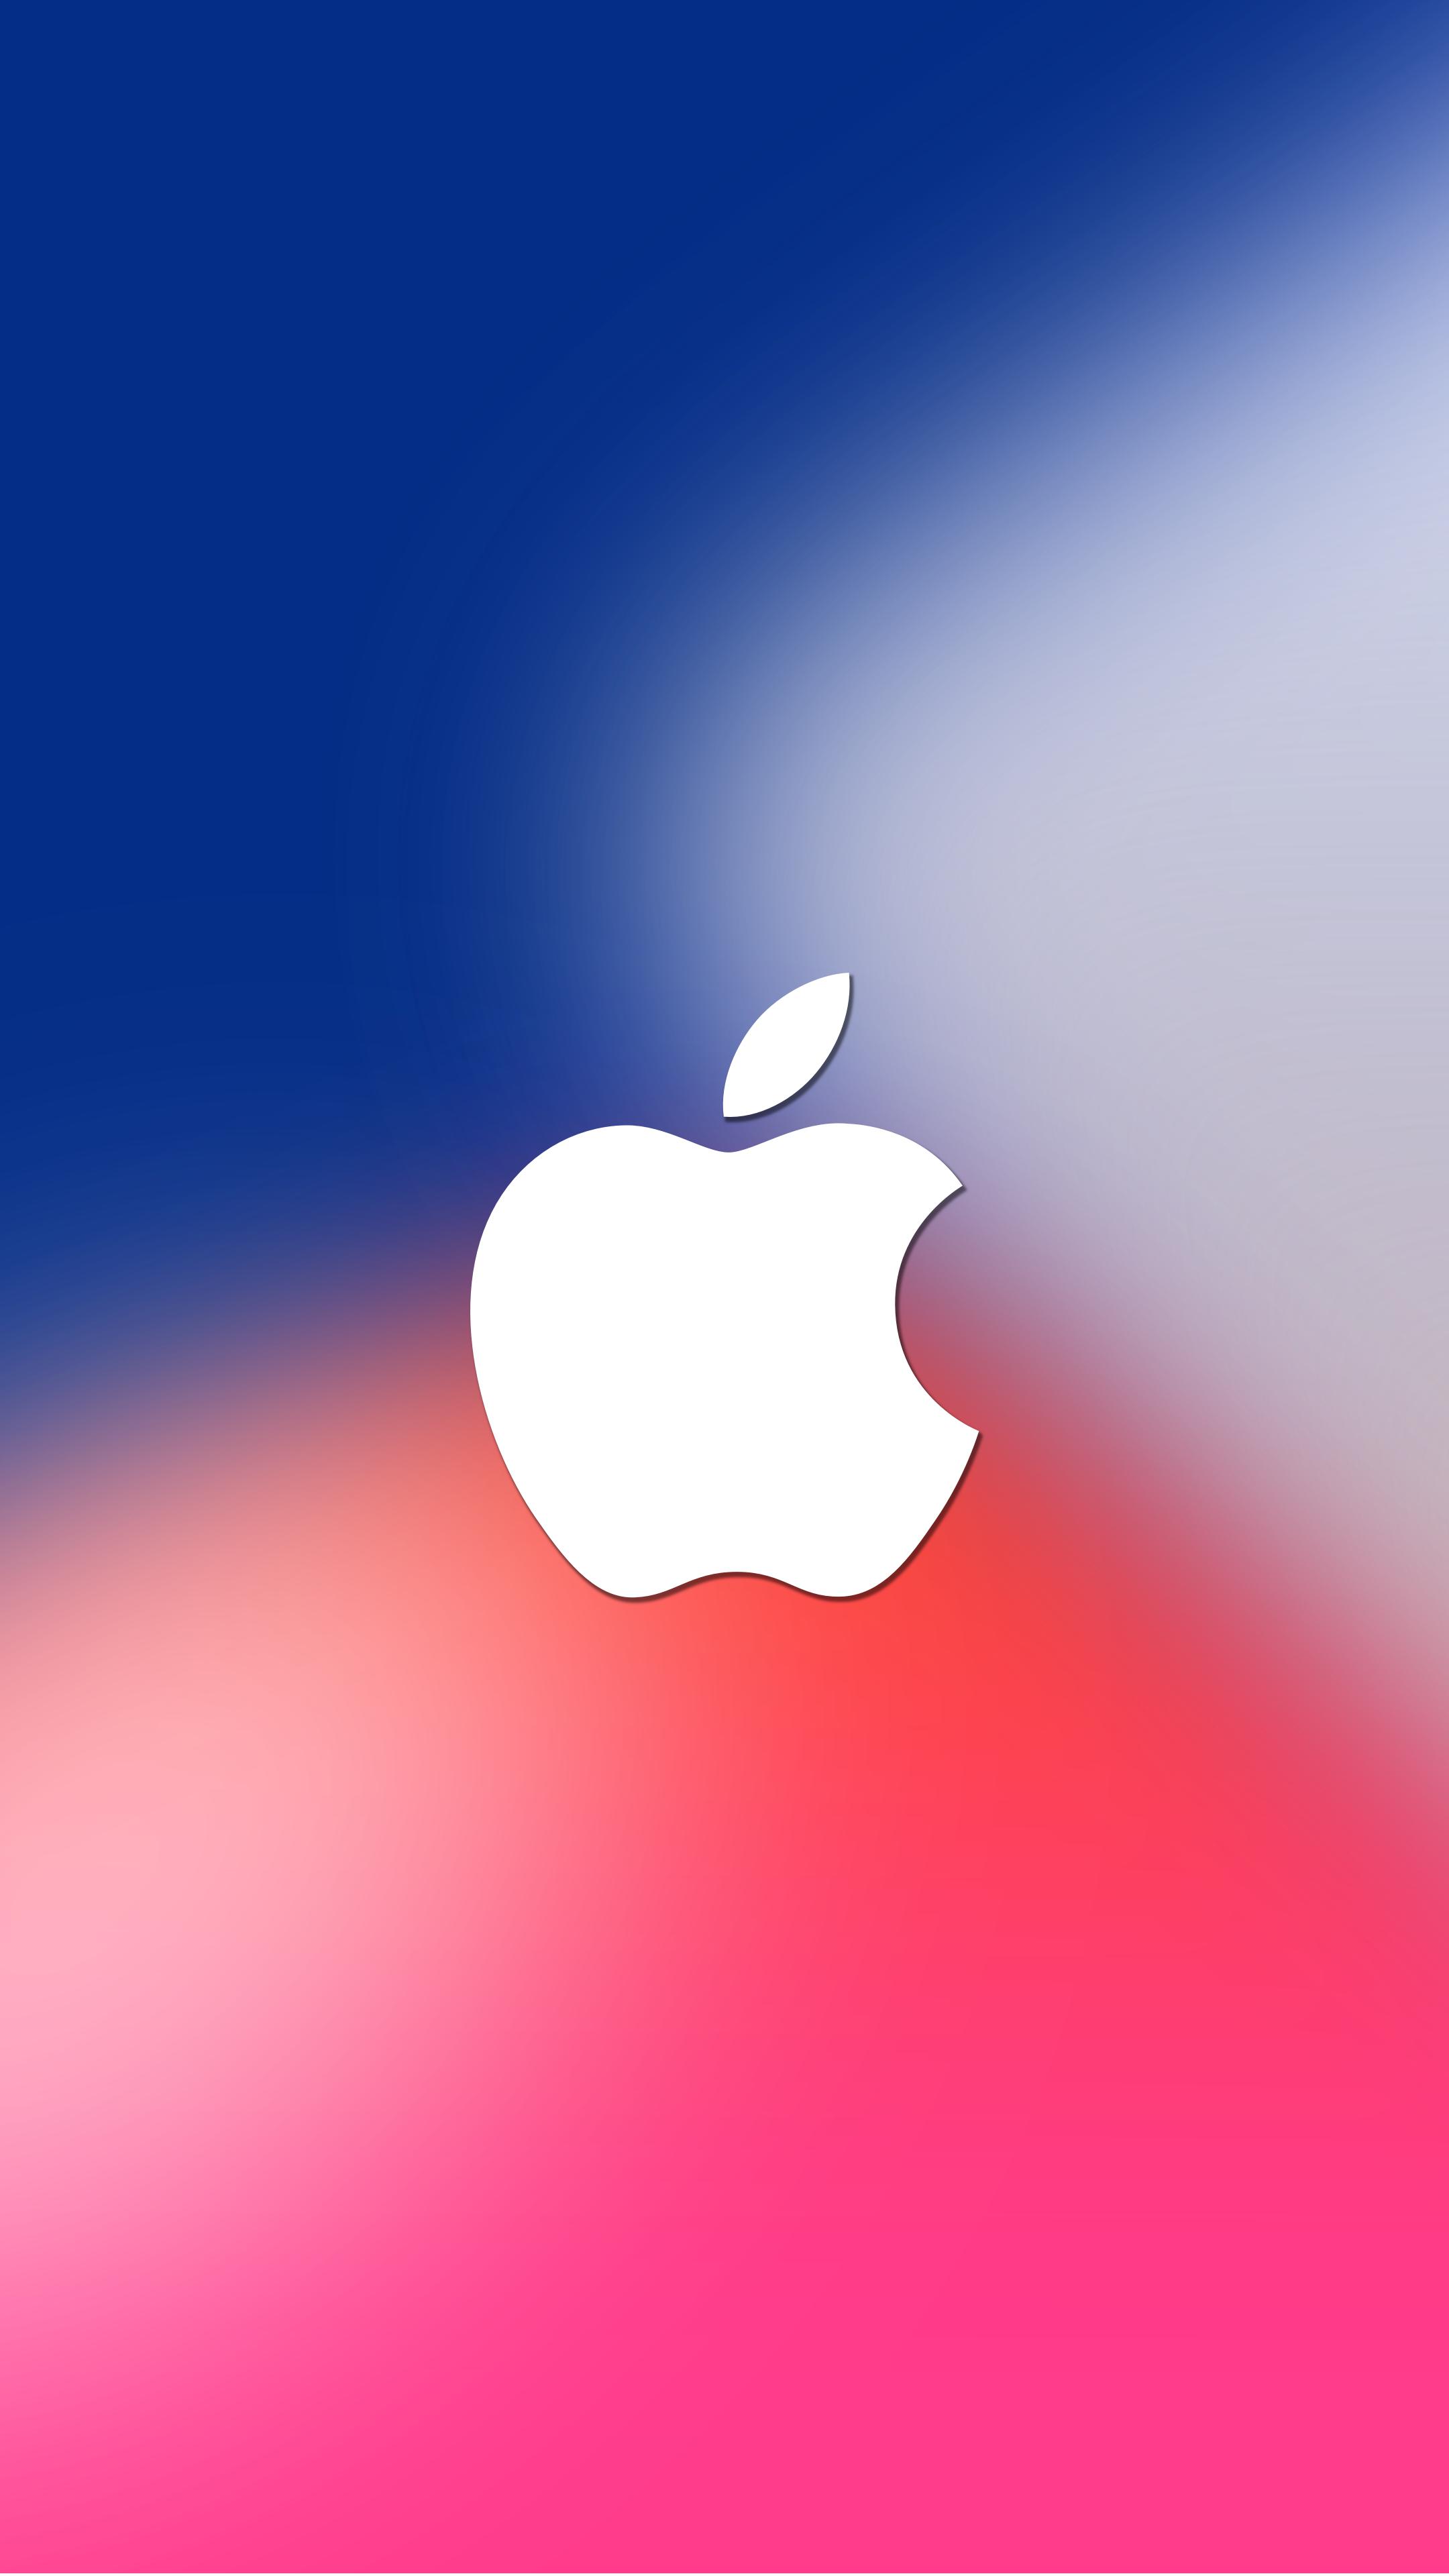 iPhone X Logo - Download September 12 iPhone 8 Event Wallpapers For iPhone, iPad and ...